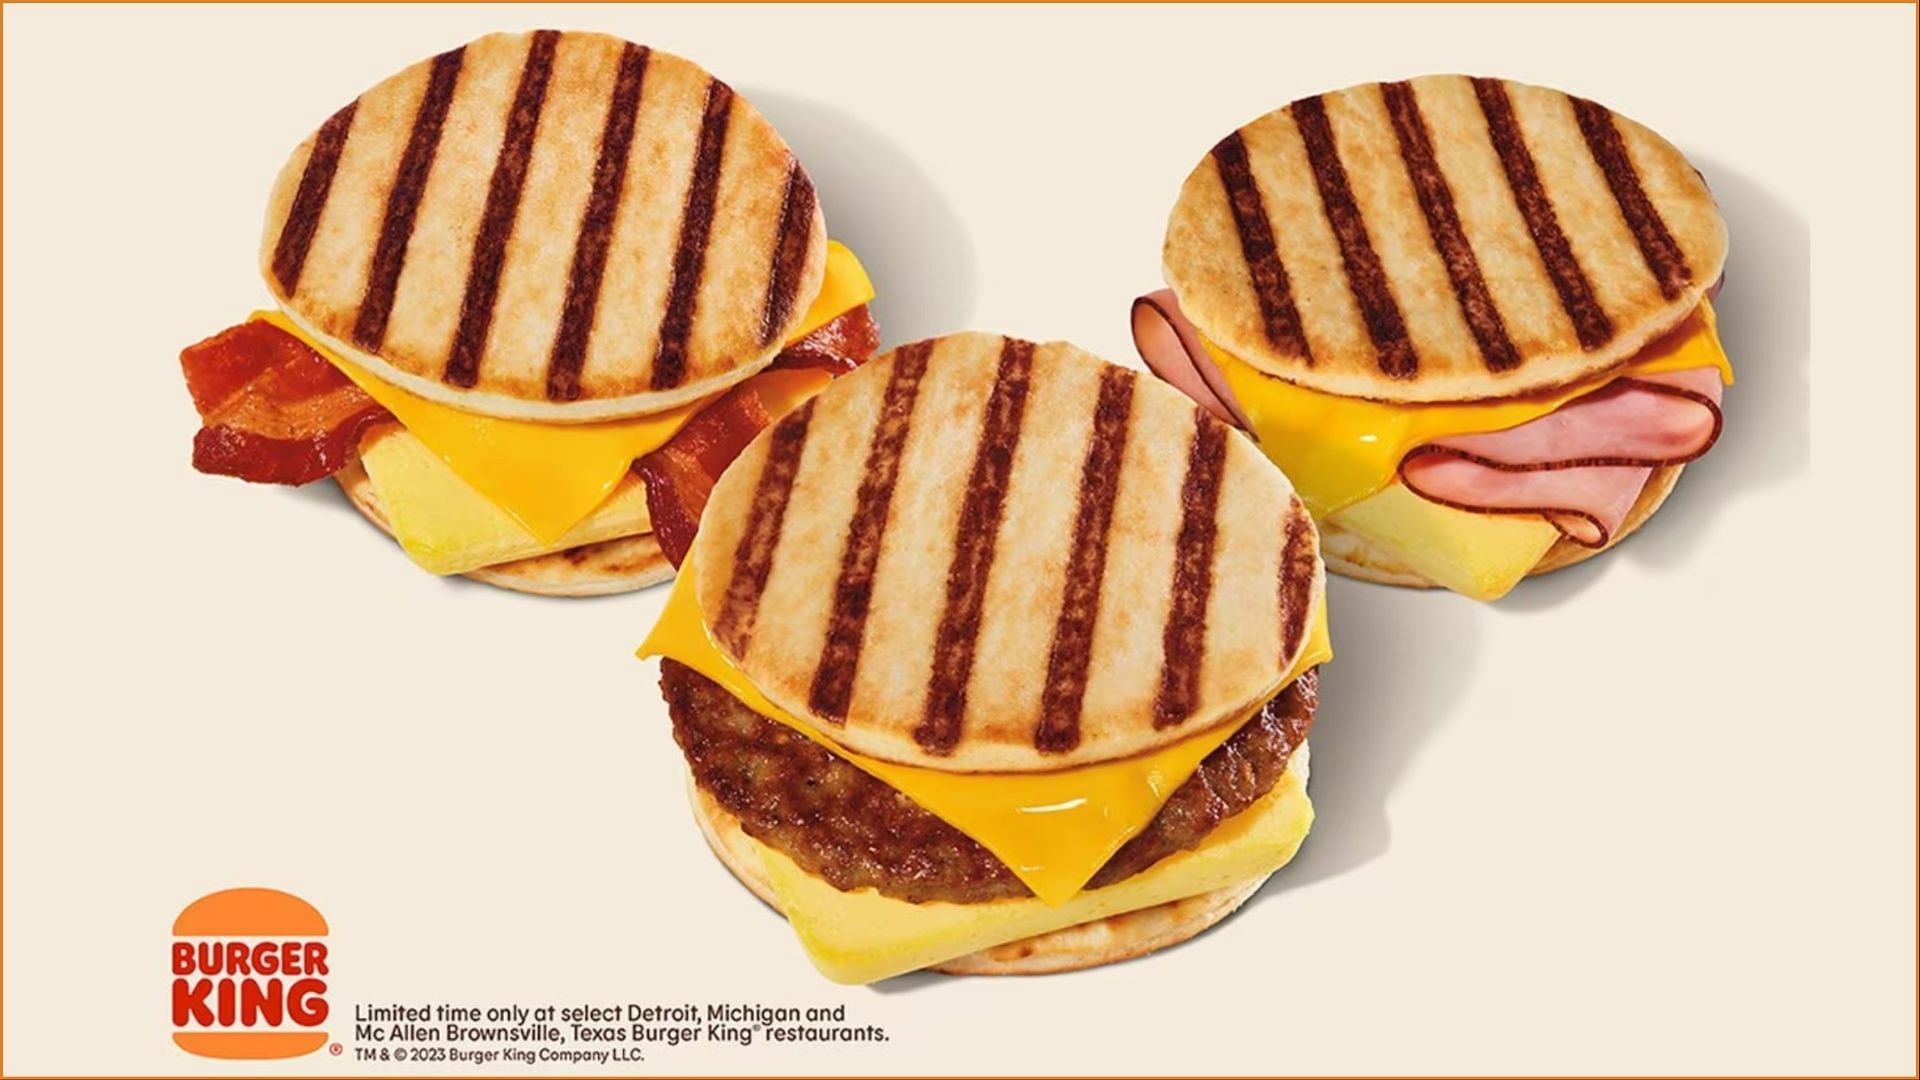 The new Grill&#039;wich sandwiches will be available at select locations starting November 16 (Image via Burger King)